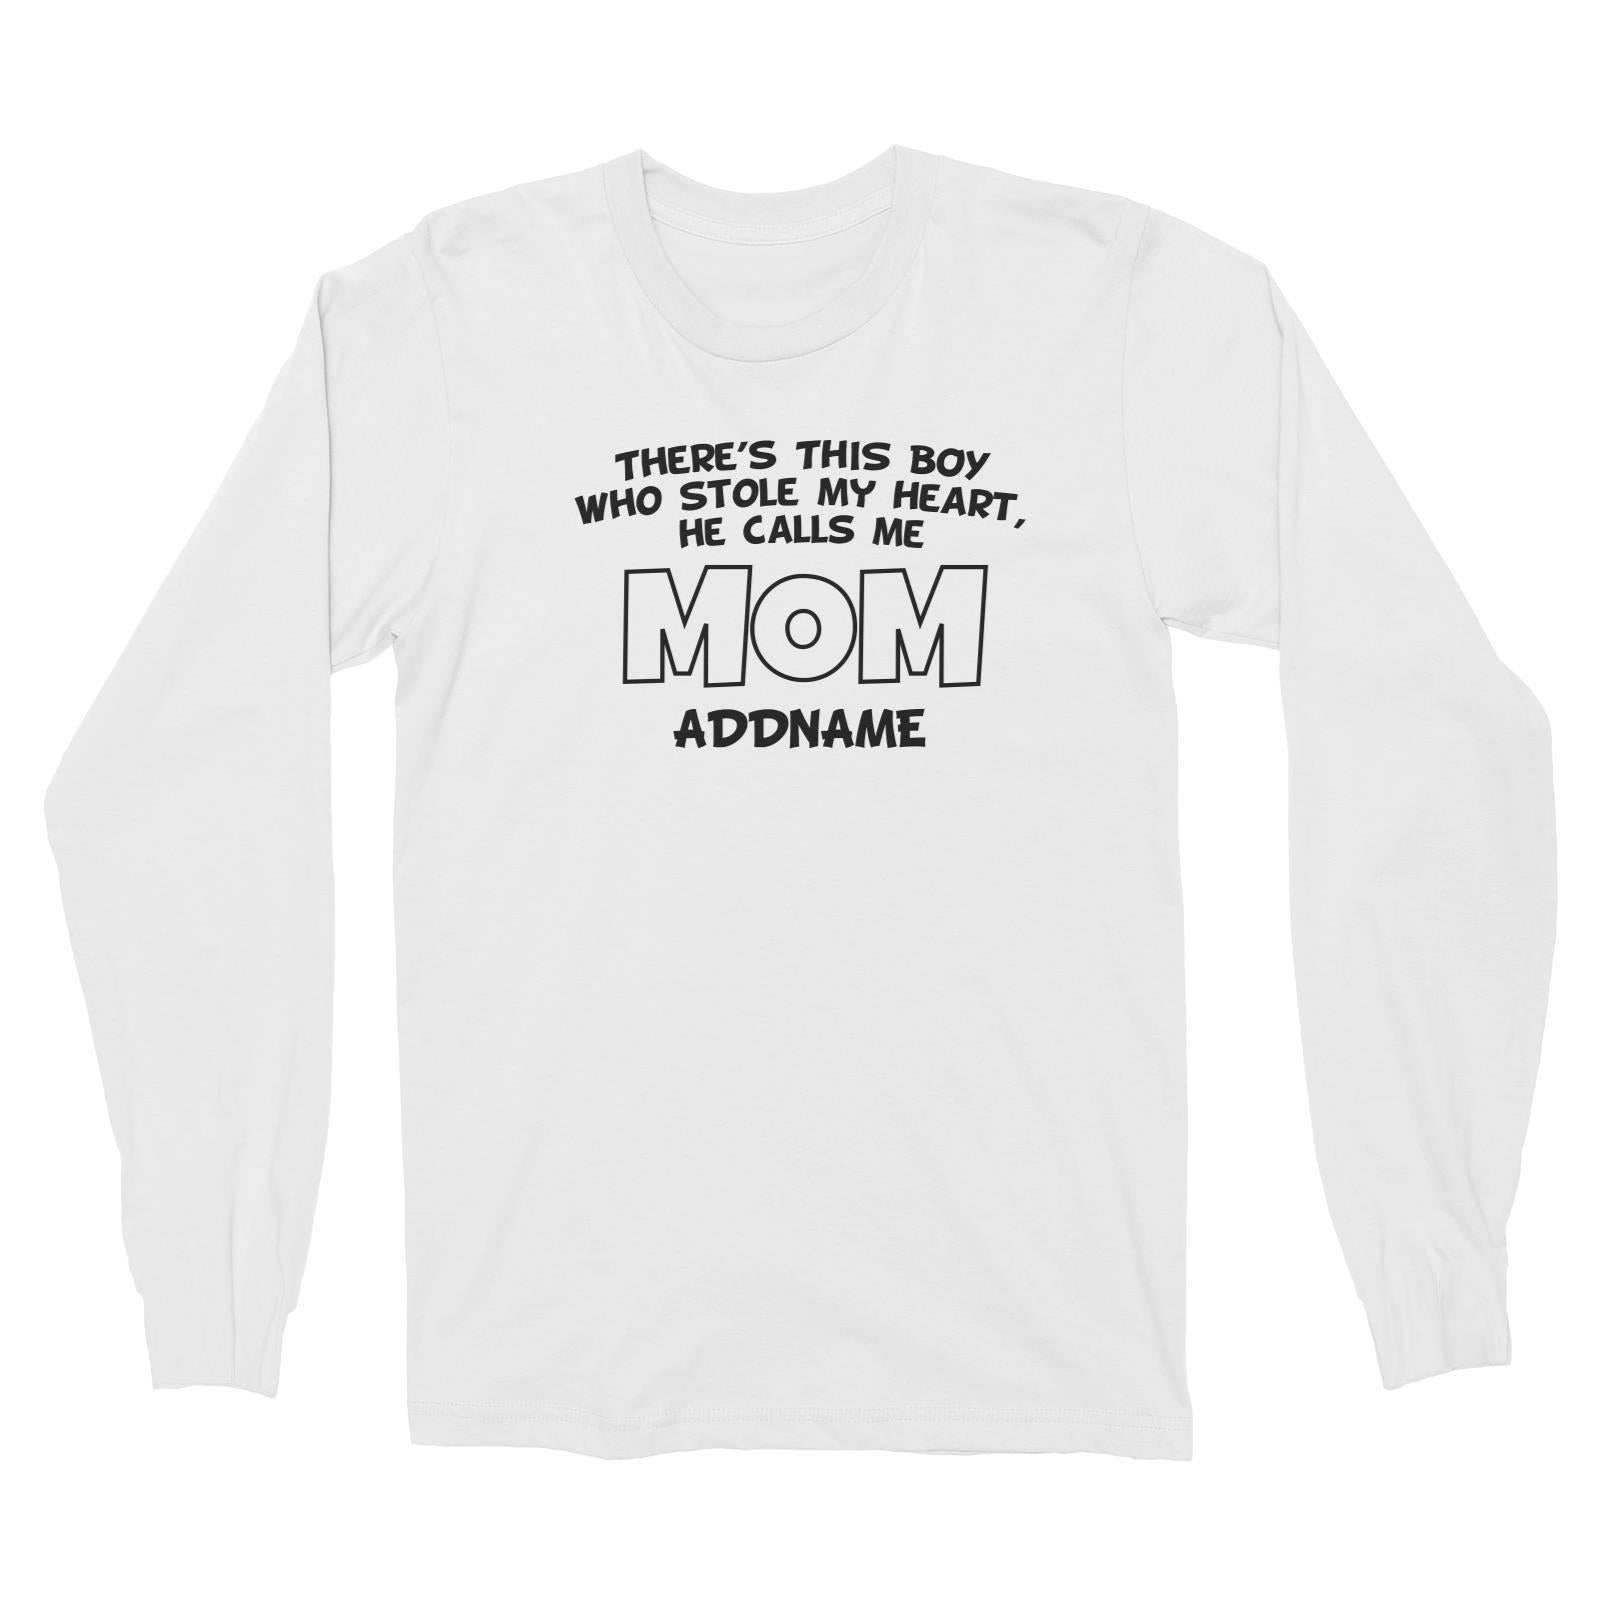 Theres This Boy Who Stole My Heart He Calls Me Mom Long Sleeve Unisex T-Shirt